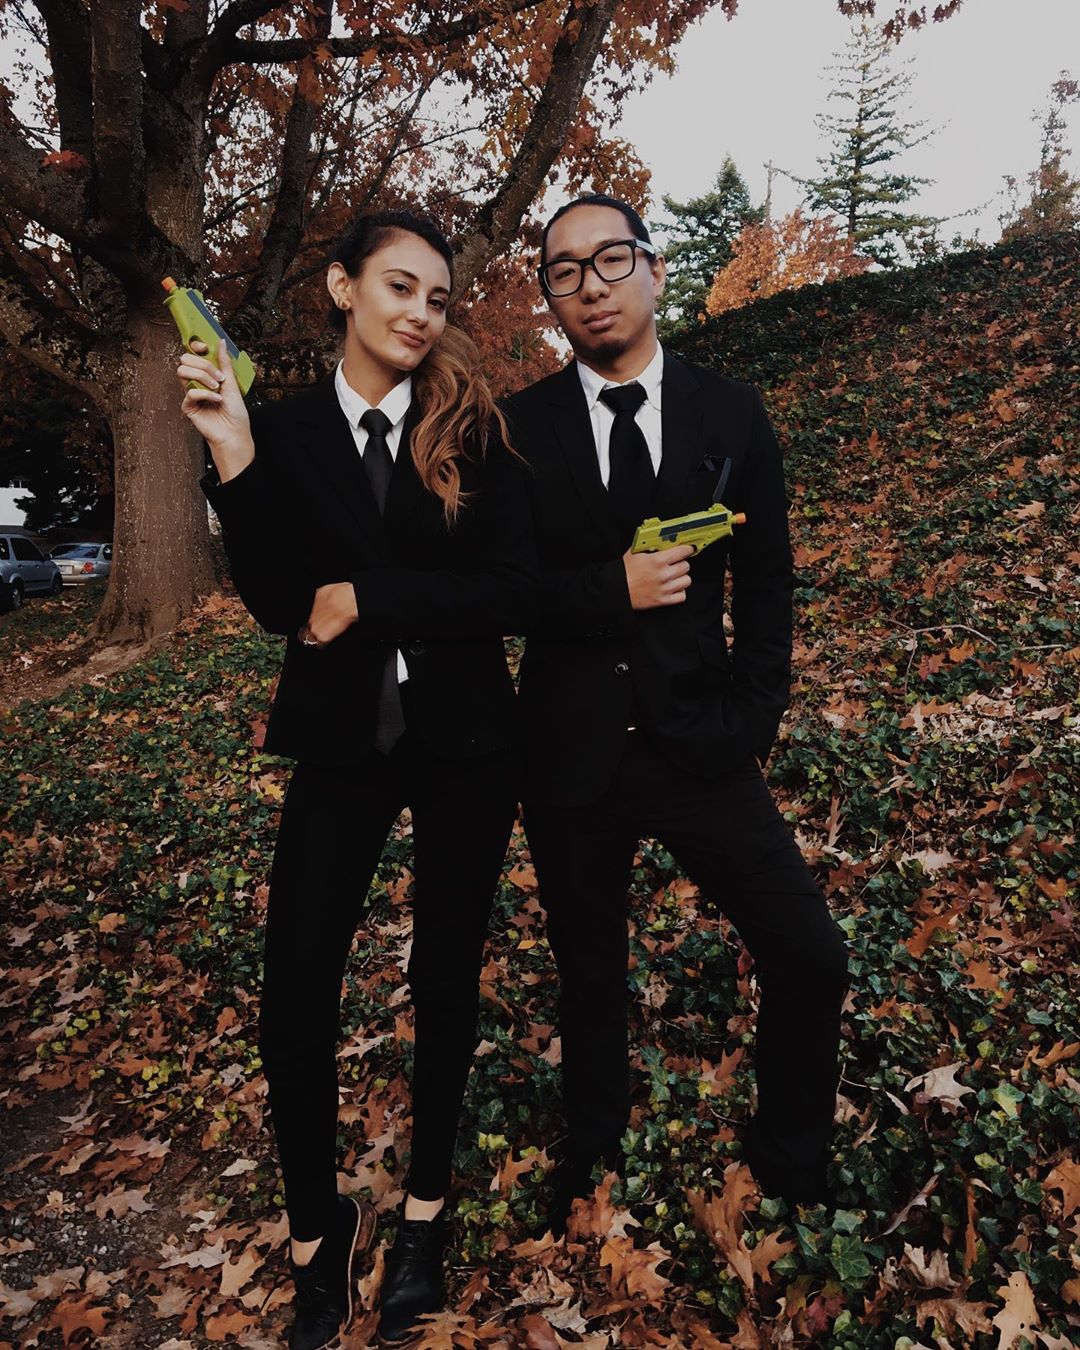 Looking for the BEST couple costume ideas for Halloween? These funny couple costumes are sure to turn heads at any college halloween party! Unique Couple Costume Ideas For Halloween #CoupleCostumes #HalloweenCostumes #CostumeIdeas